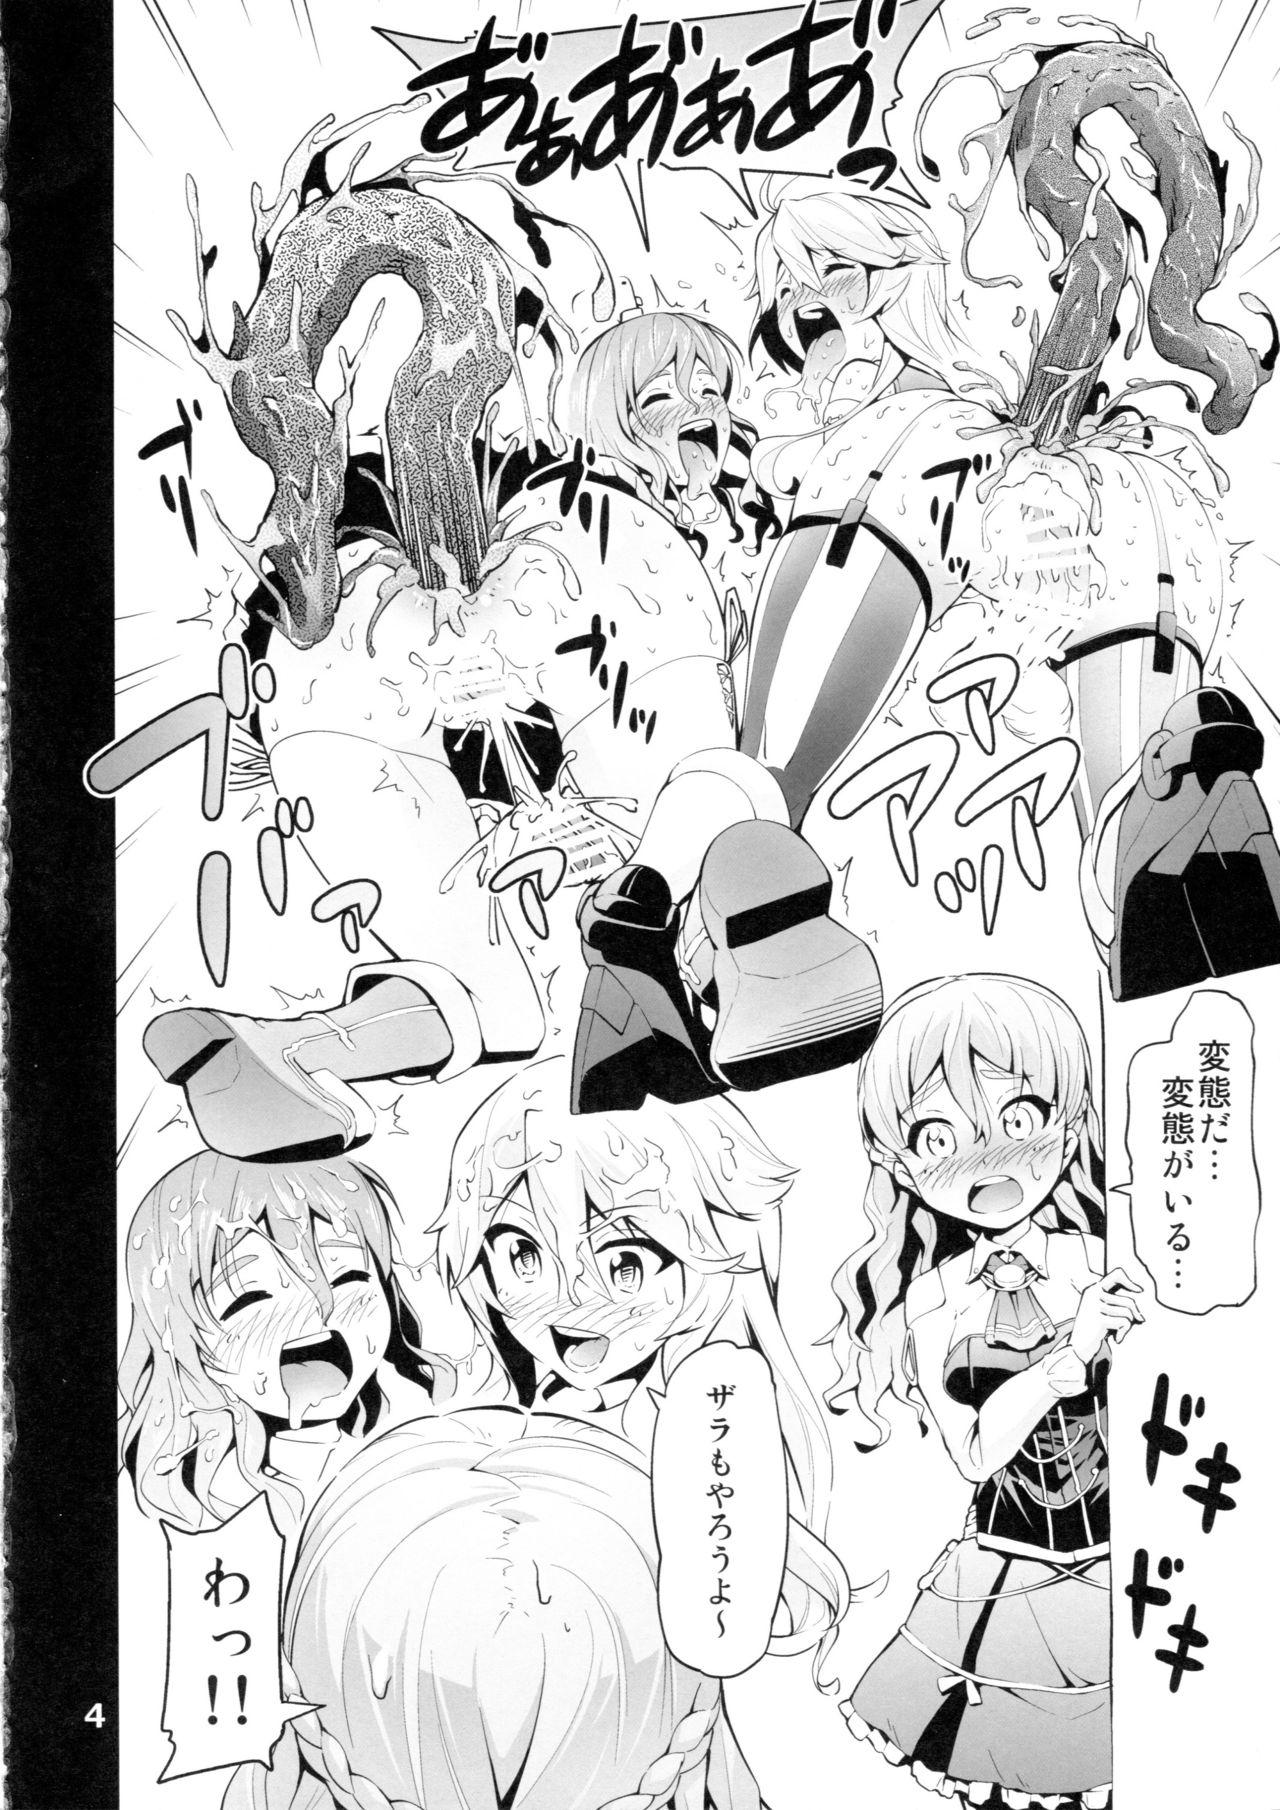 Cash ICE WORK 3 - Kantai collection Olderwoman - Page 3